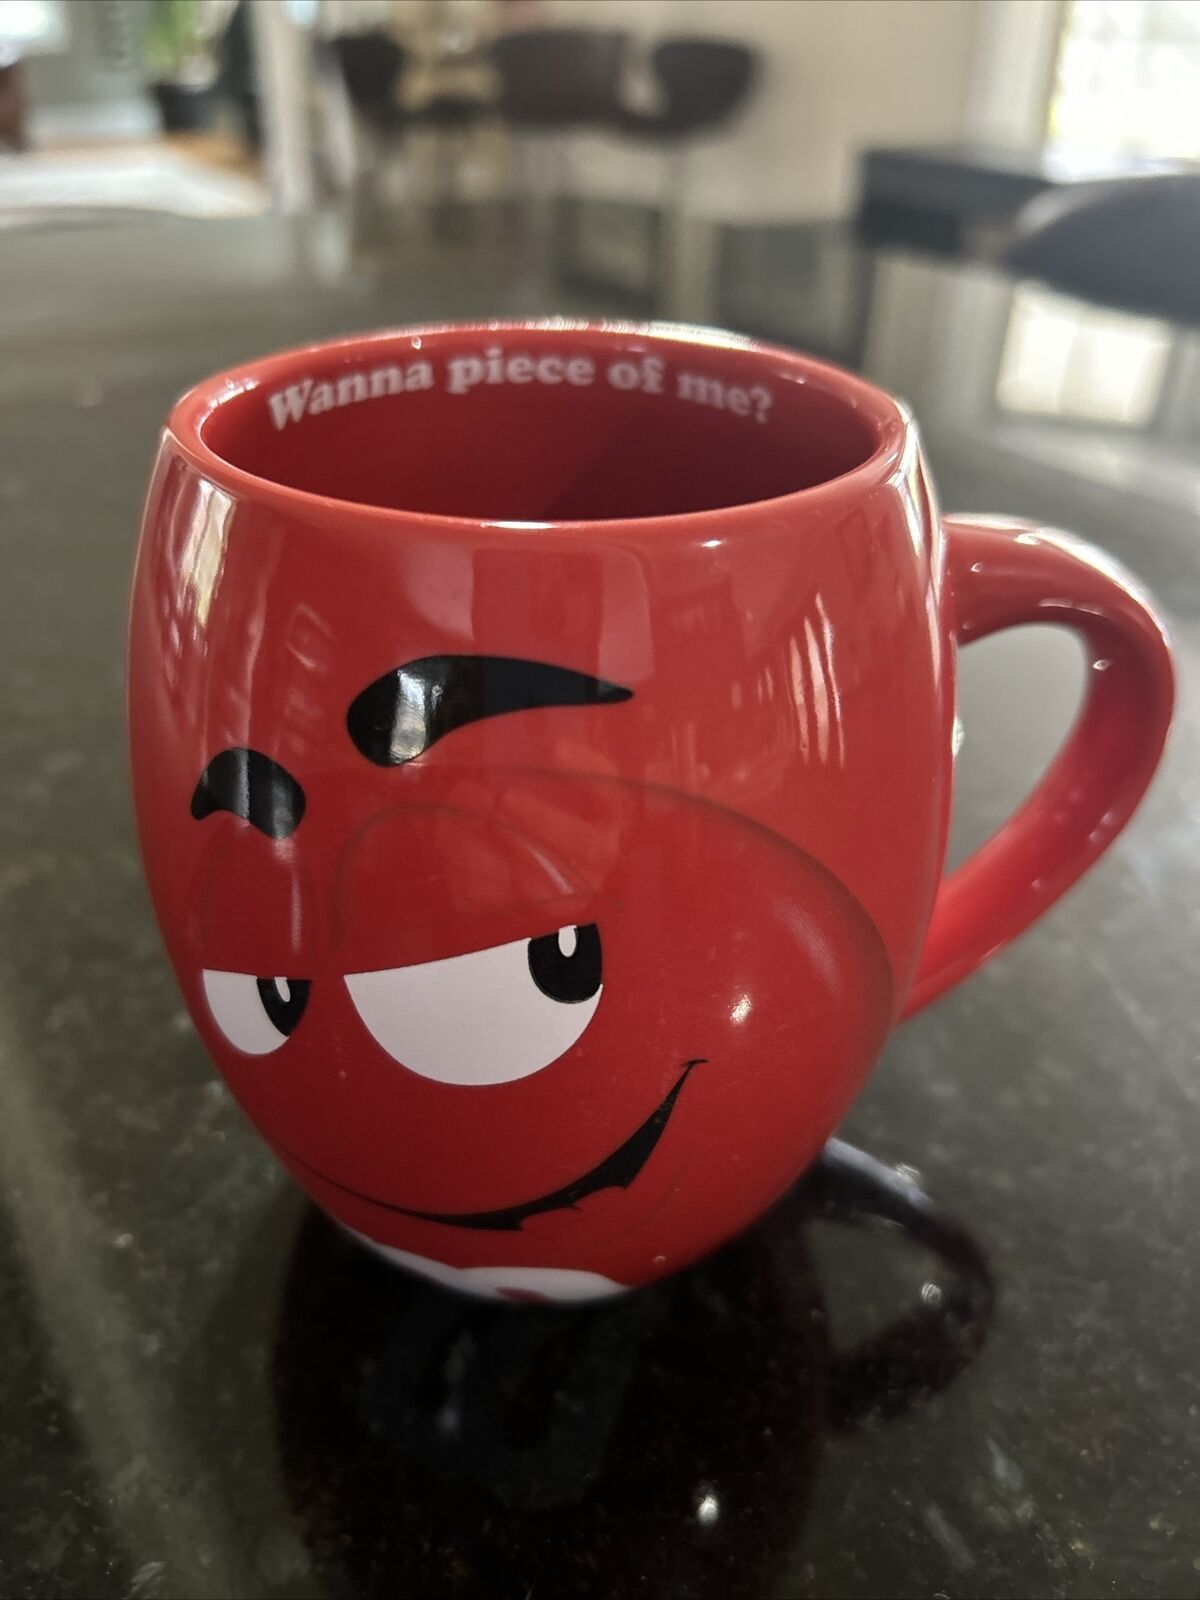 M&M 20oz Coffee Mug Red “Wanna piece of me?” 2015 from M&M’s World 4.75” tall